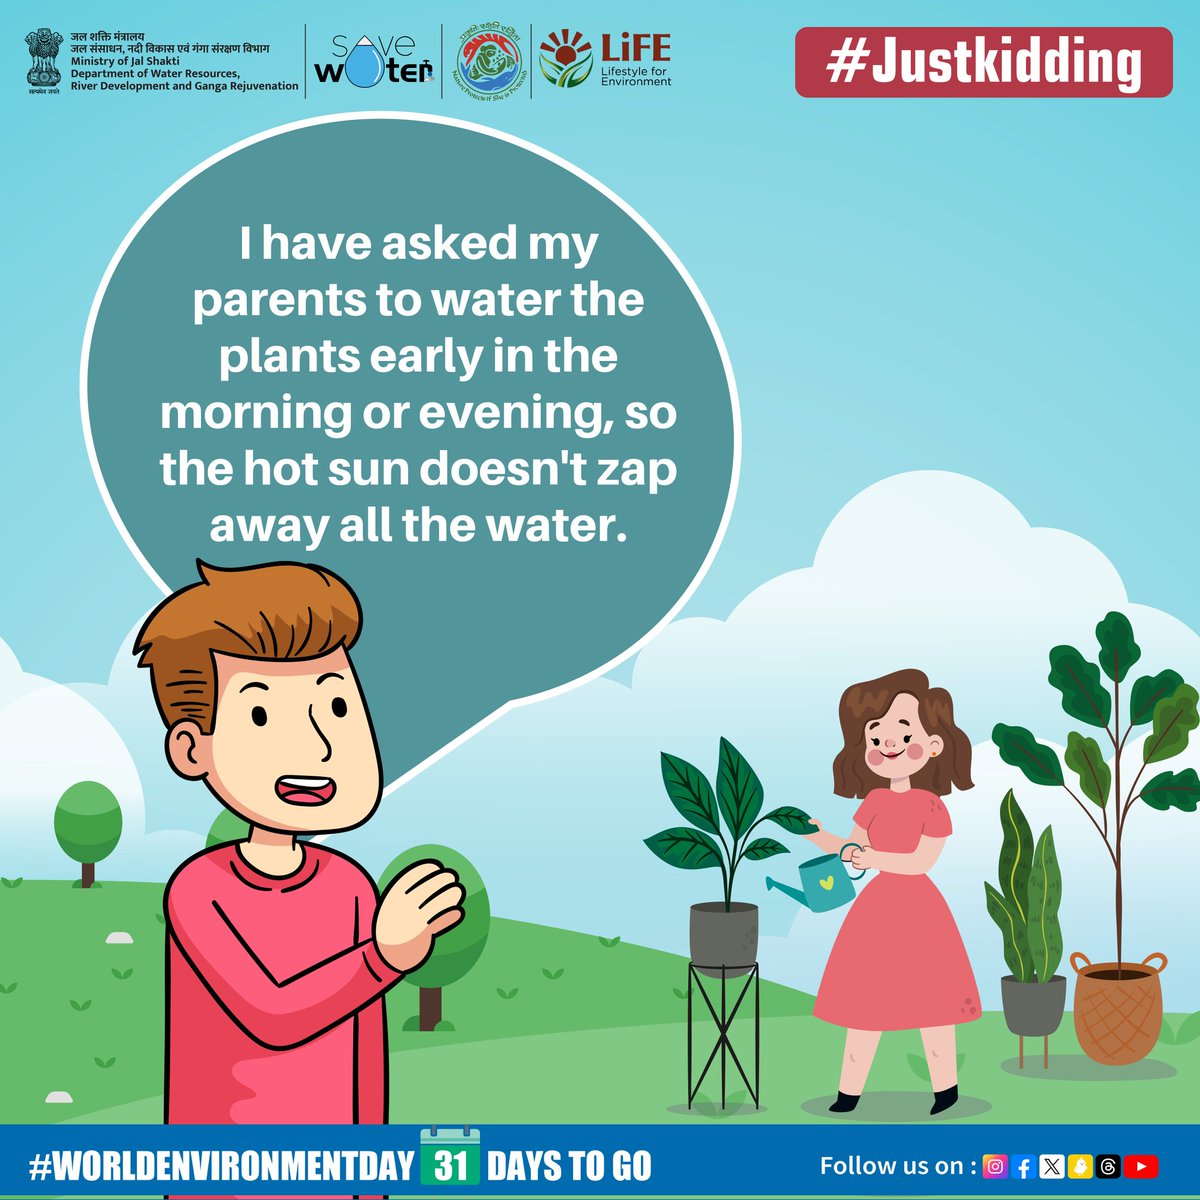 Why water your plants in the morning or evening? It's simple: less water lost to #evaporation, more water absorbed by your plants. Let's #savewater and nurture our green spaces! Let's water wisely every day! #JustKidding #WaterWisely #MissionLiFE #ProPlanetPeople